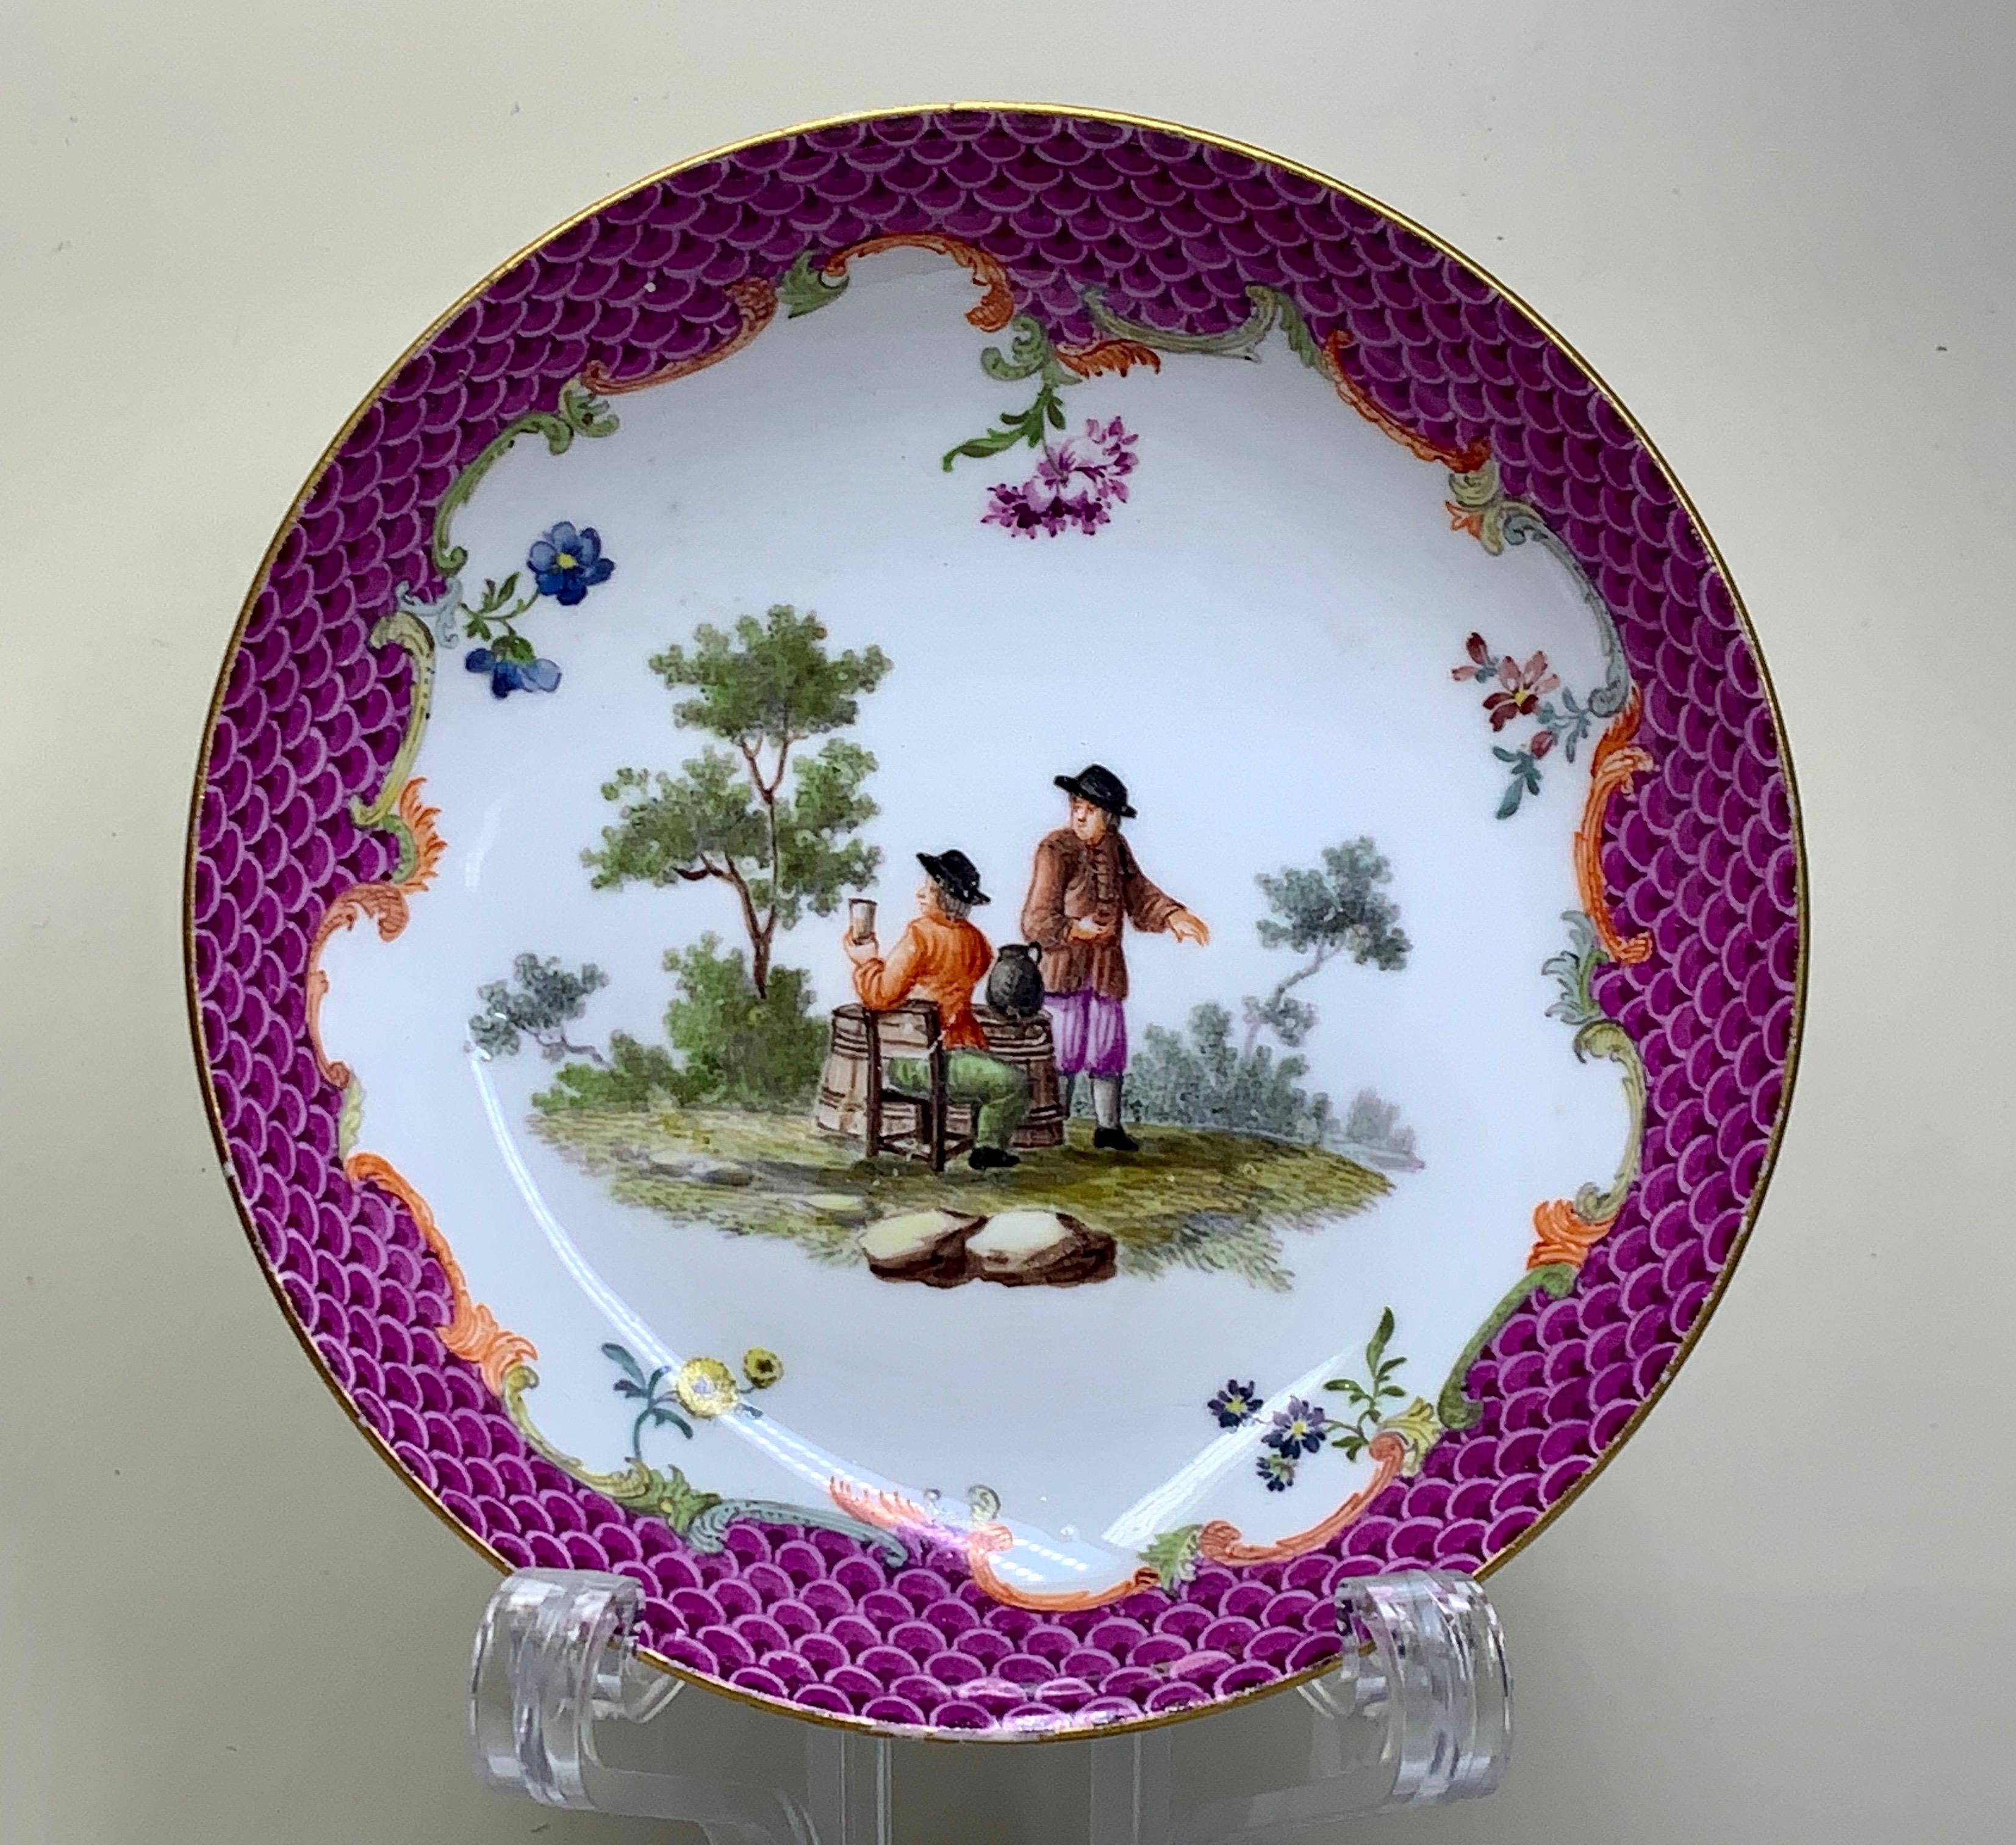 A quality Meissen teabowl and saucer, superbly painted with Watteauesque scenes in a garden, superb pink or purple scale trim all around the rims with nice scroll work underneath. There is some gilding to the edges., both pieces have under glazed